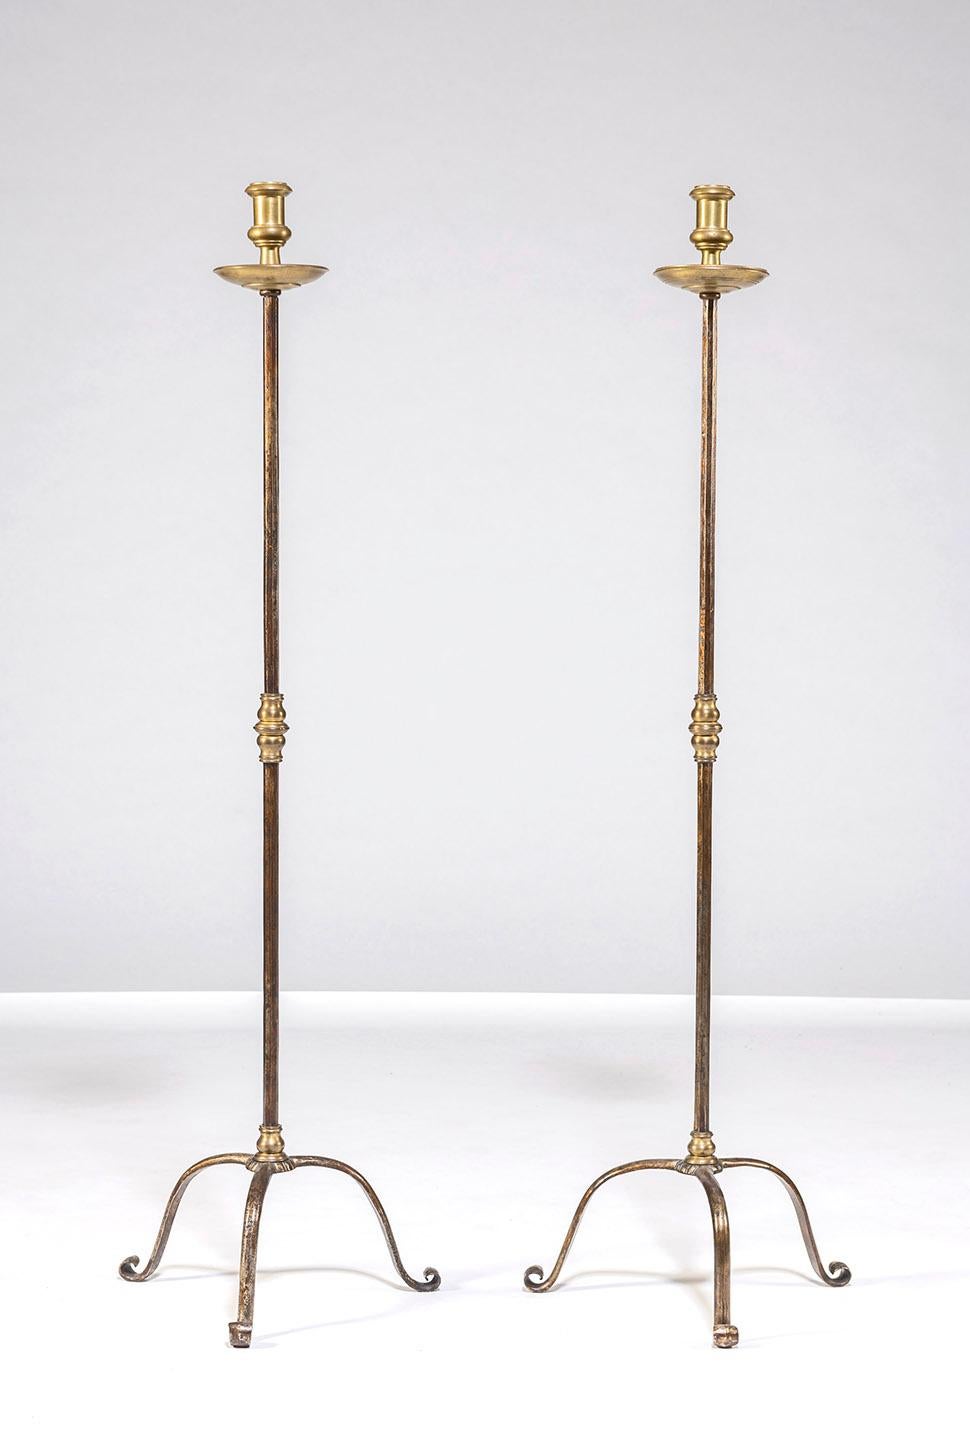 Pair of wrought iron and brass floor standing candle stands by American blacksmith Samuel Yellin circa 1920s. Impressed mark 